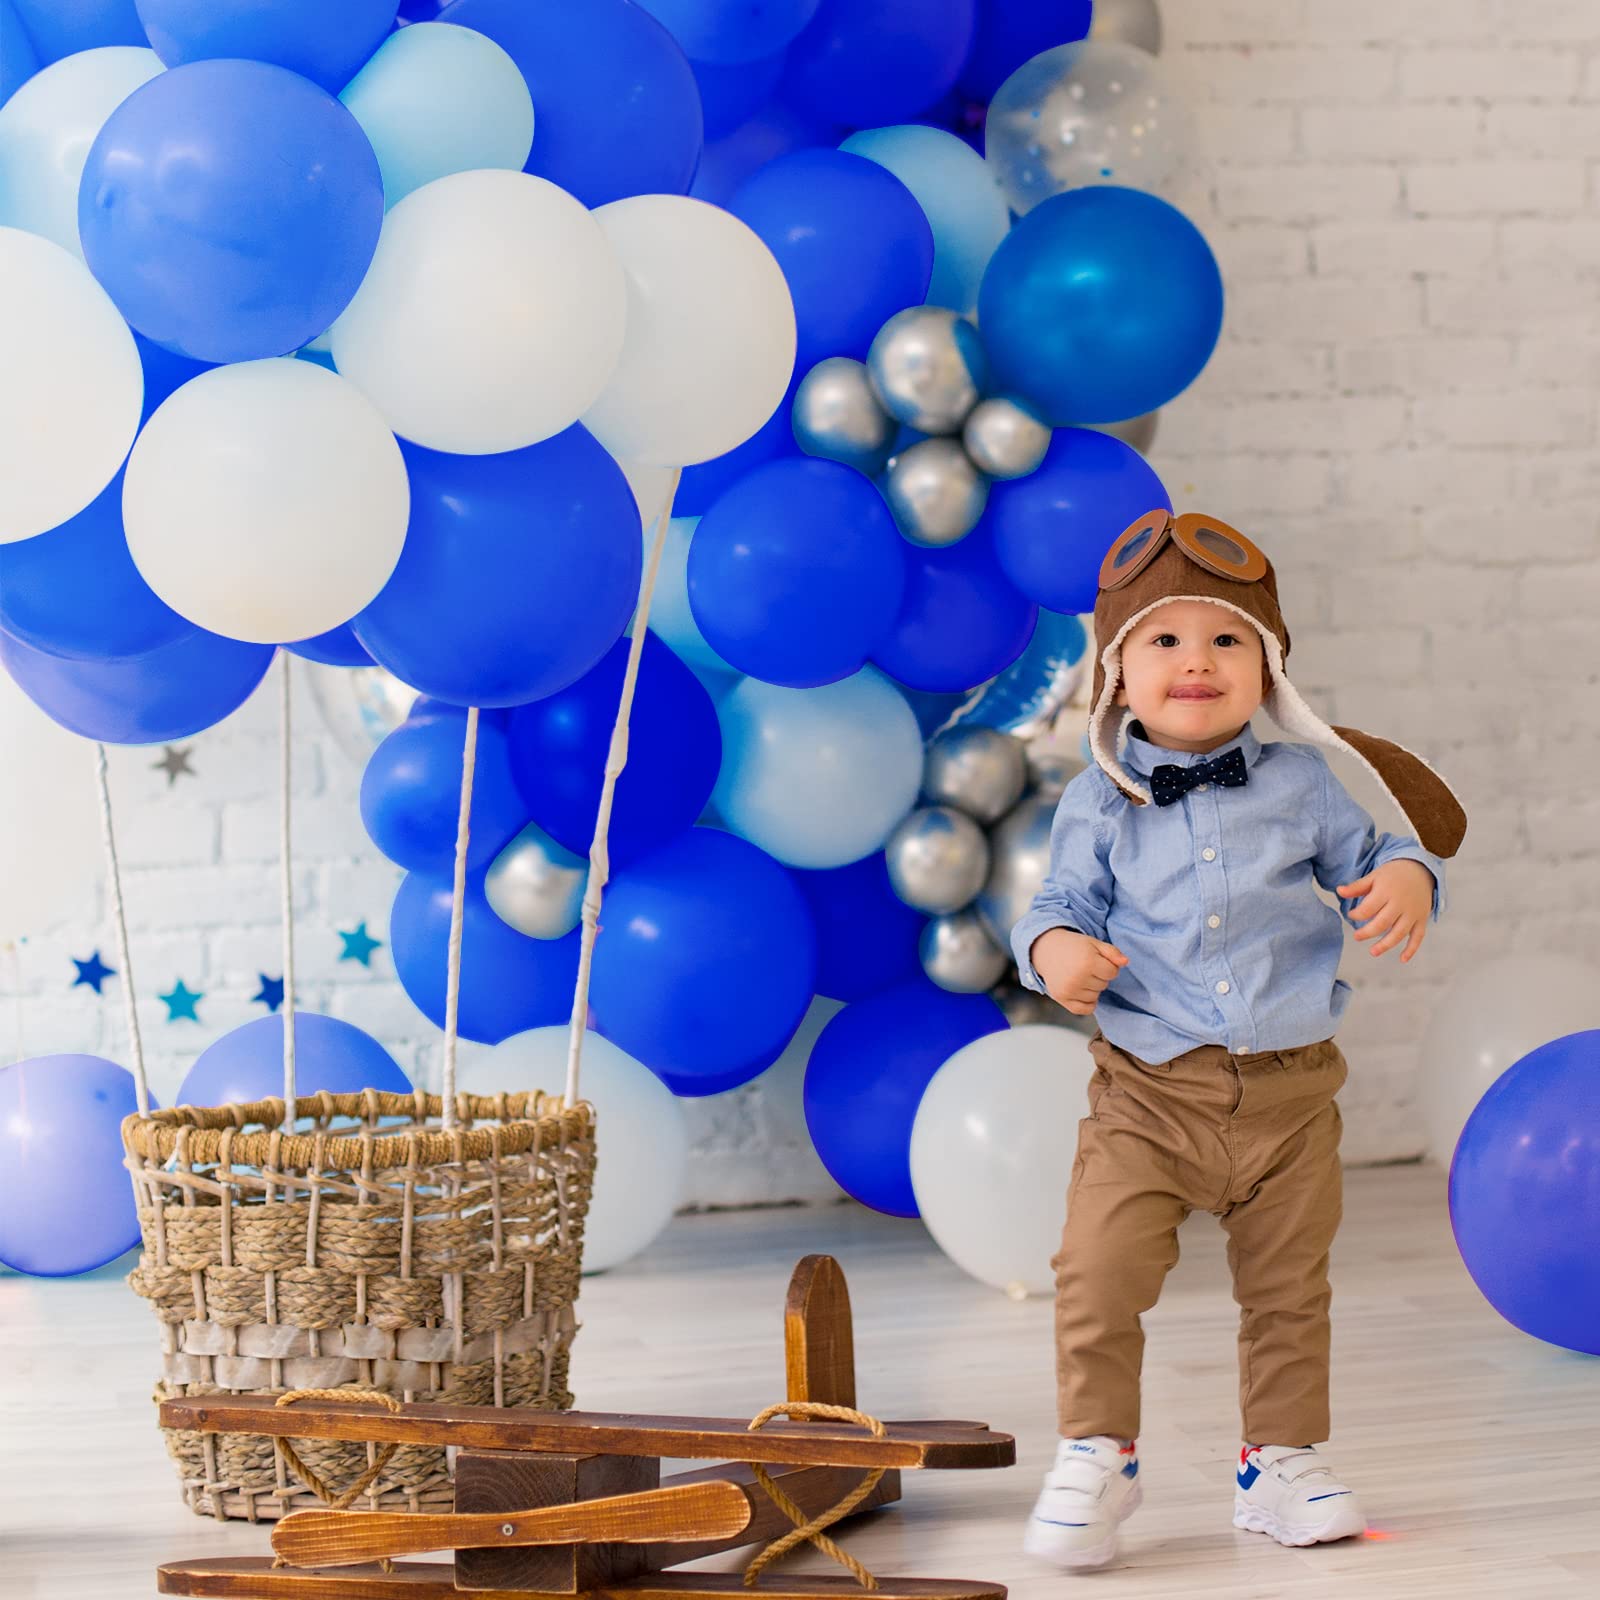 RUBFAC 129pcs Royal Blue and White Balloons Different Sizes 18 12 10 5 Inch for Garland Arch, for Birthday Party Graduation Wedding Baby Shower Baseball Nautical Party Decoration